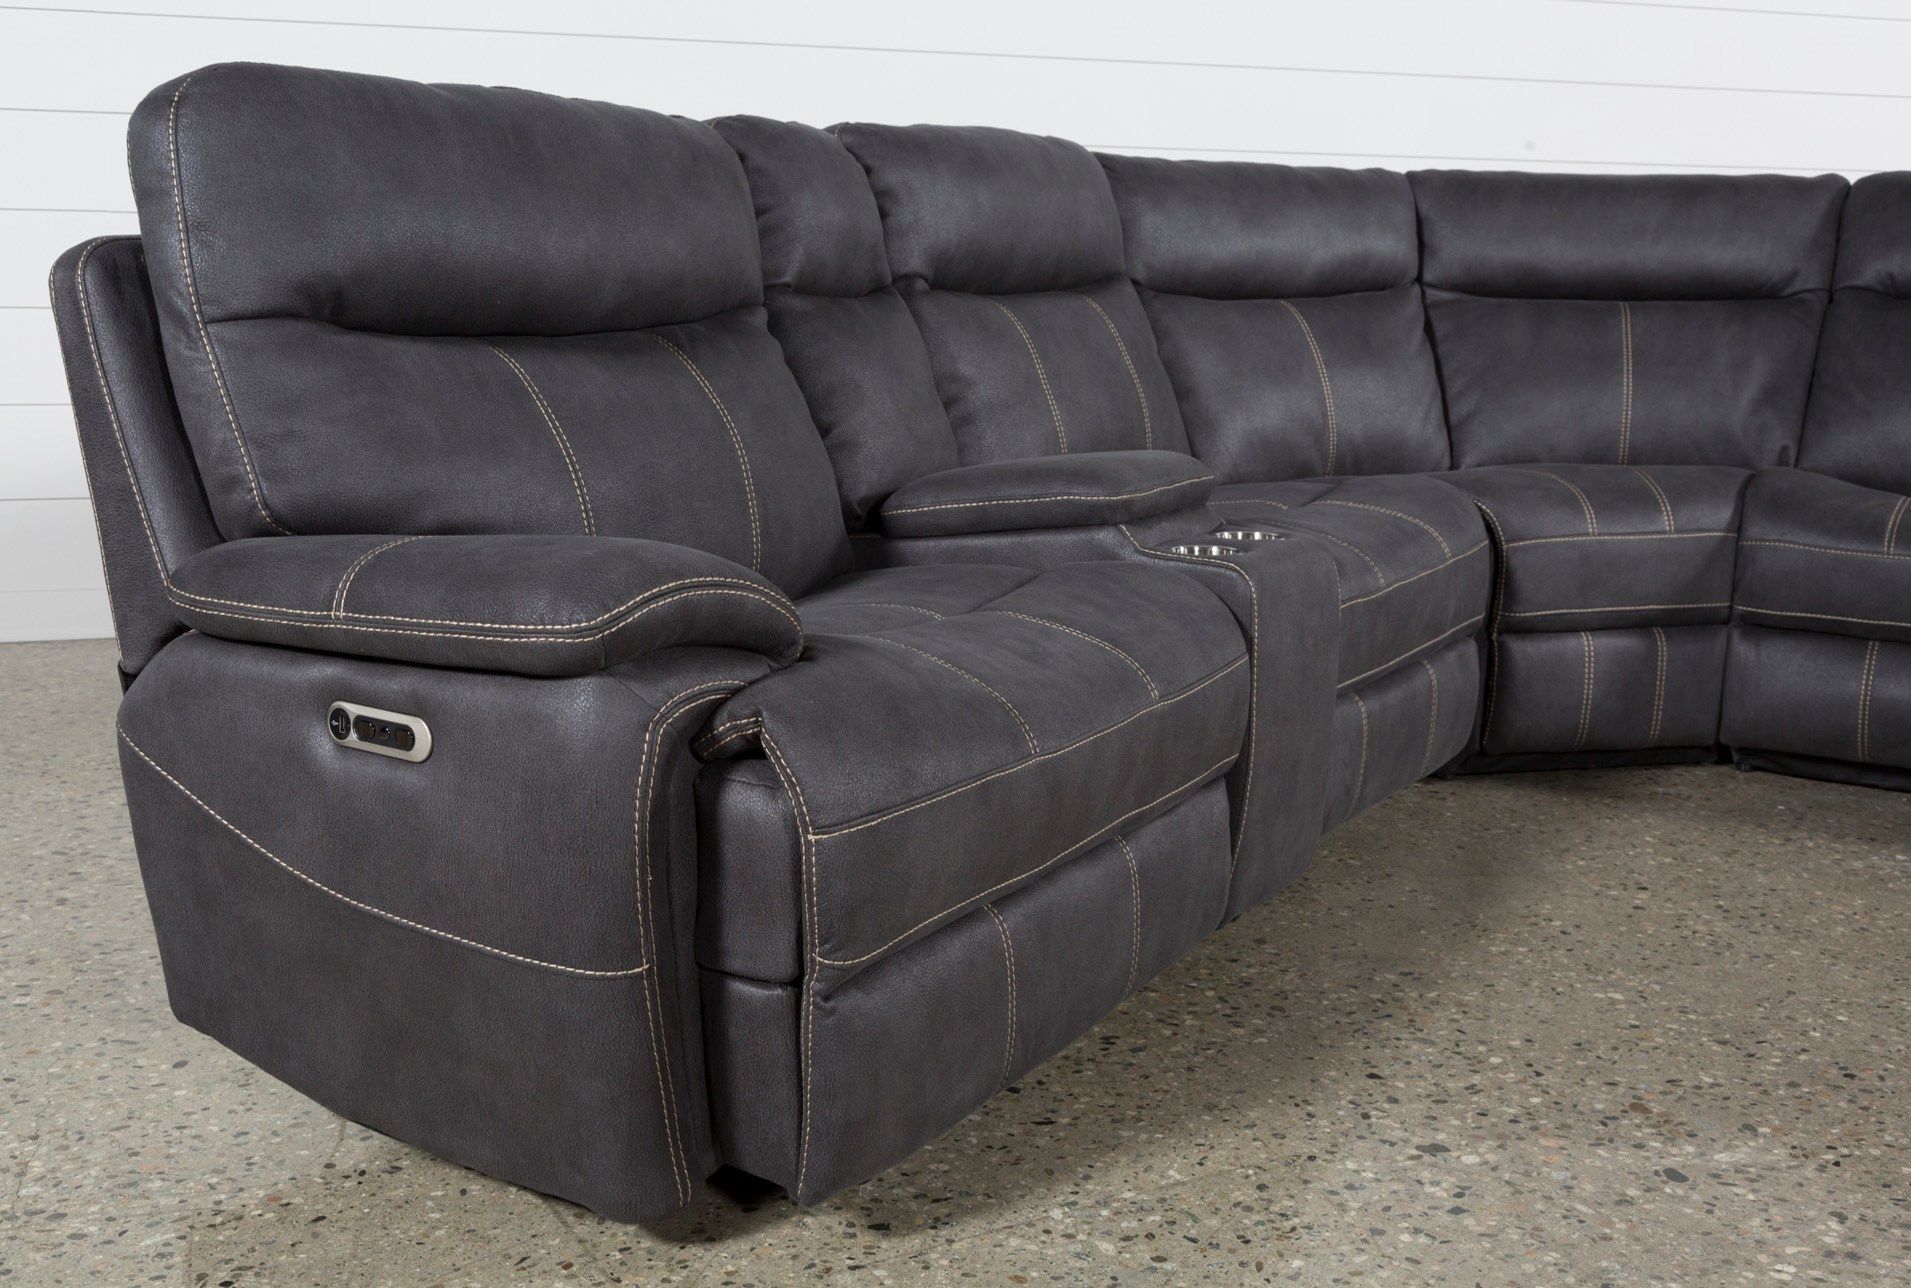 Denali Charcoal Grey 6 Piece Reclining Sectional W/2 Power Headrests Pertaining To Denali Charcoal Grey 6 Piece Reclining Sectionals With 2 Power Headrests (Photo 1 of 30)